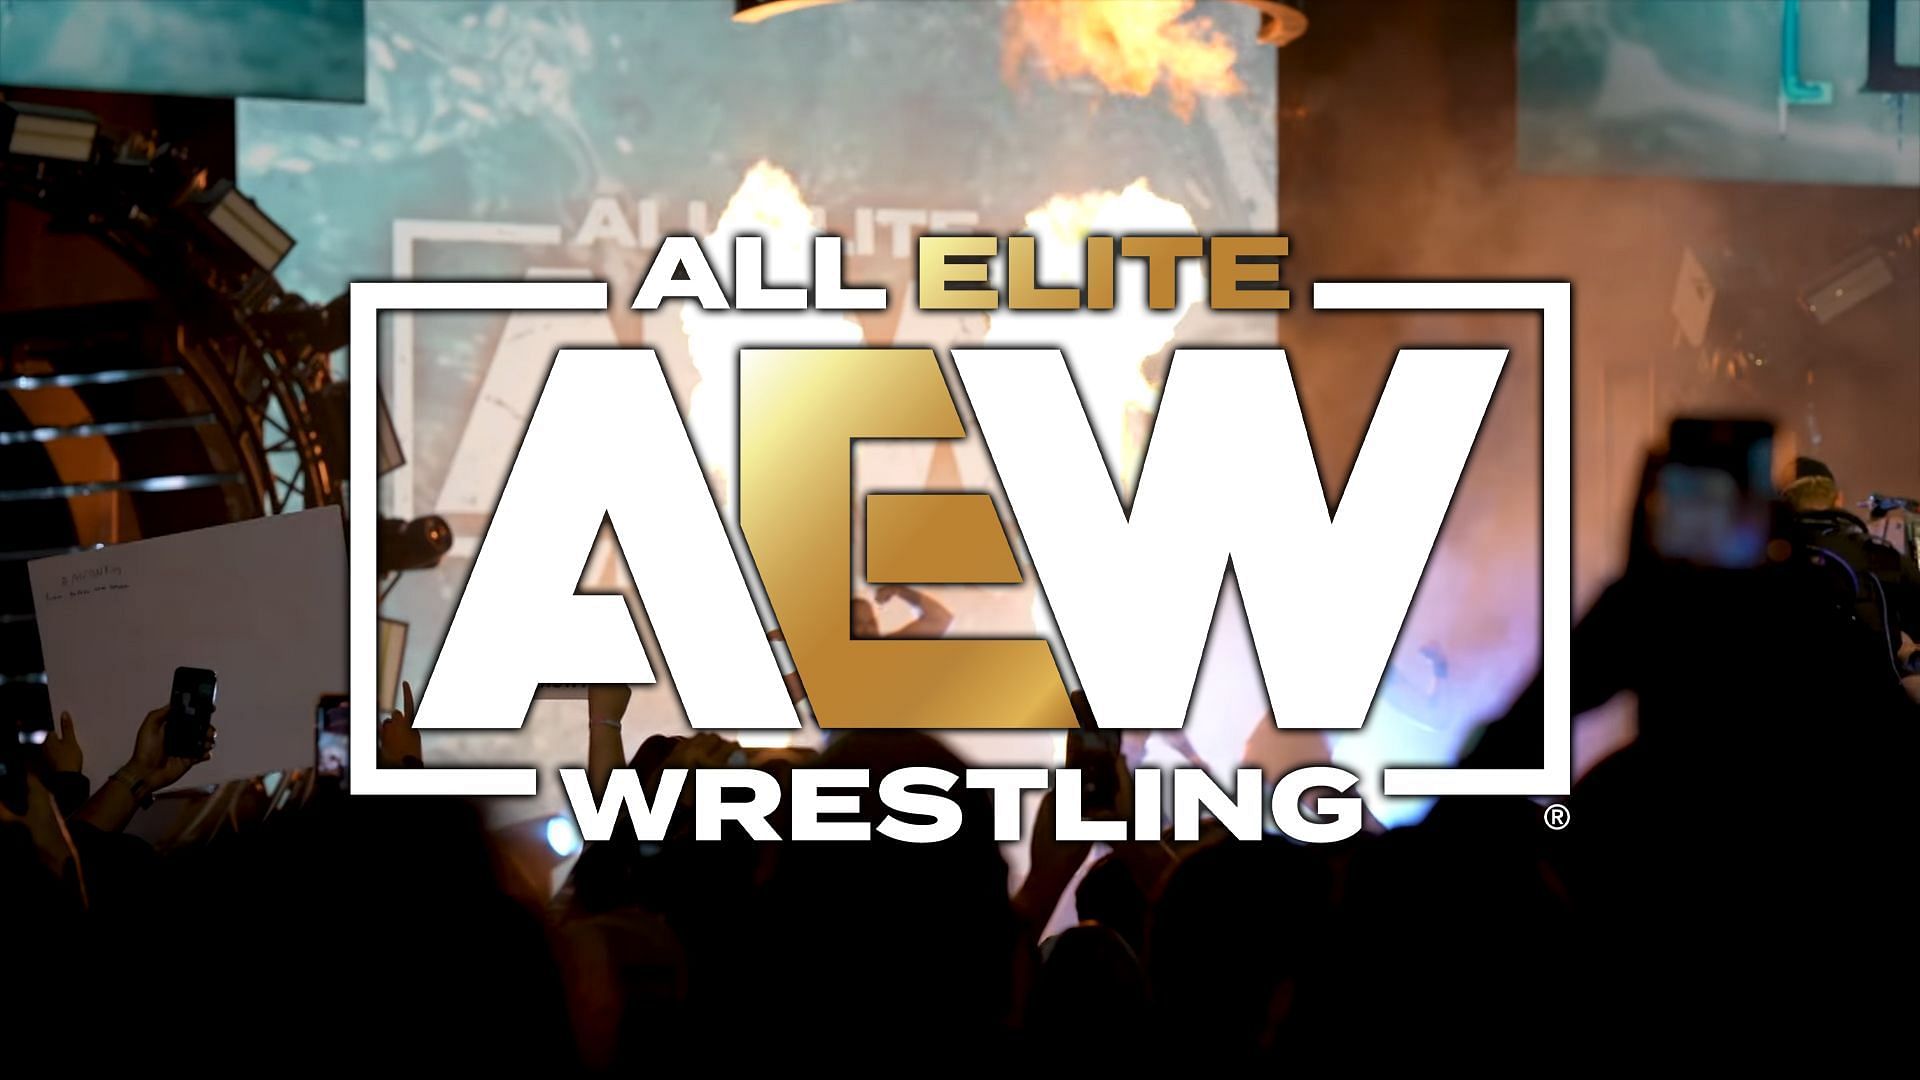 All Elite Wrestling was founded in 2019 (image credit: AEW on YouTube)